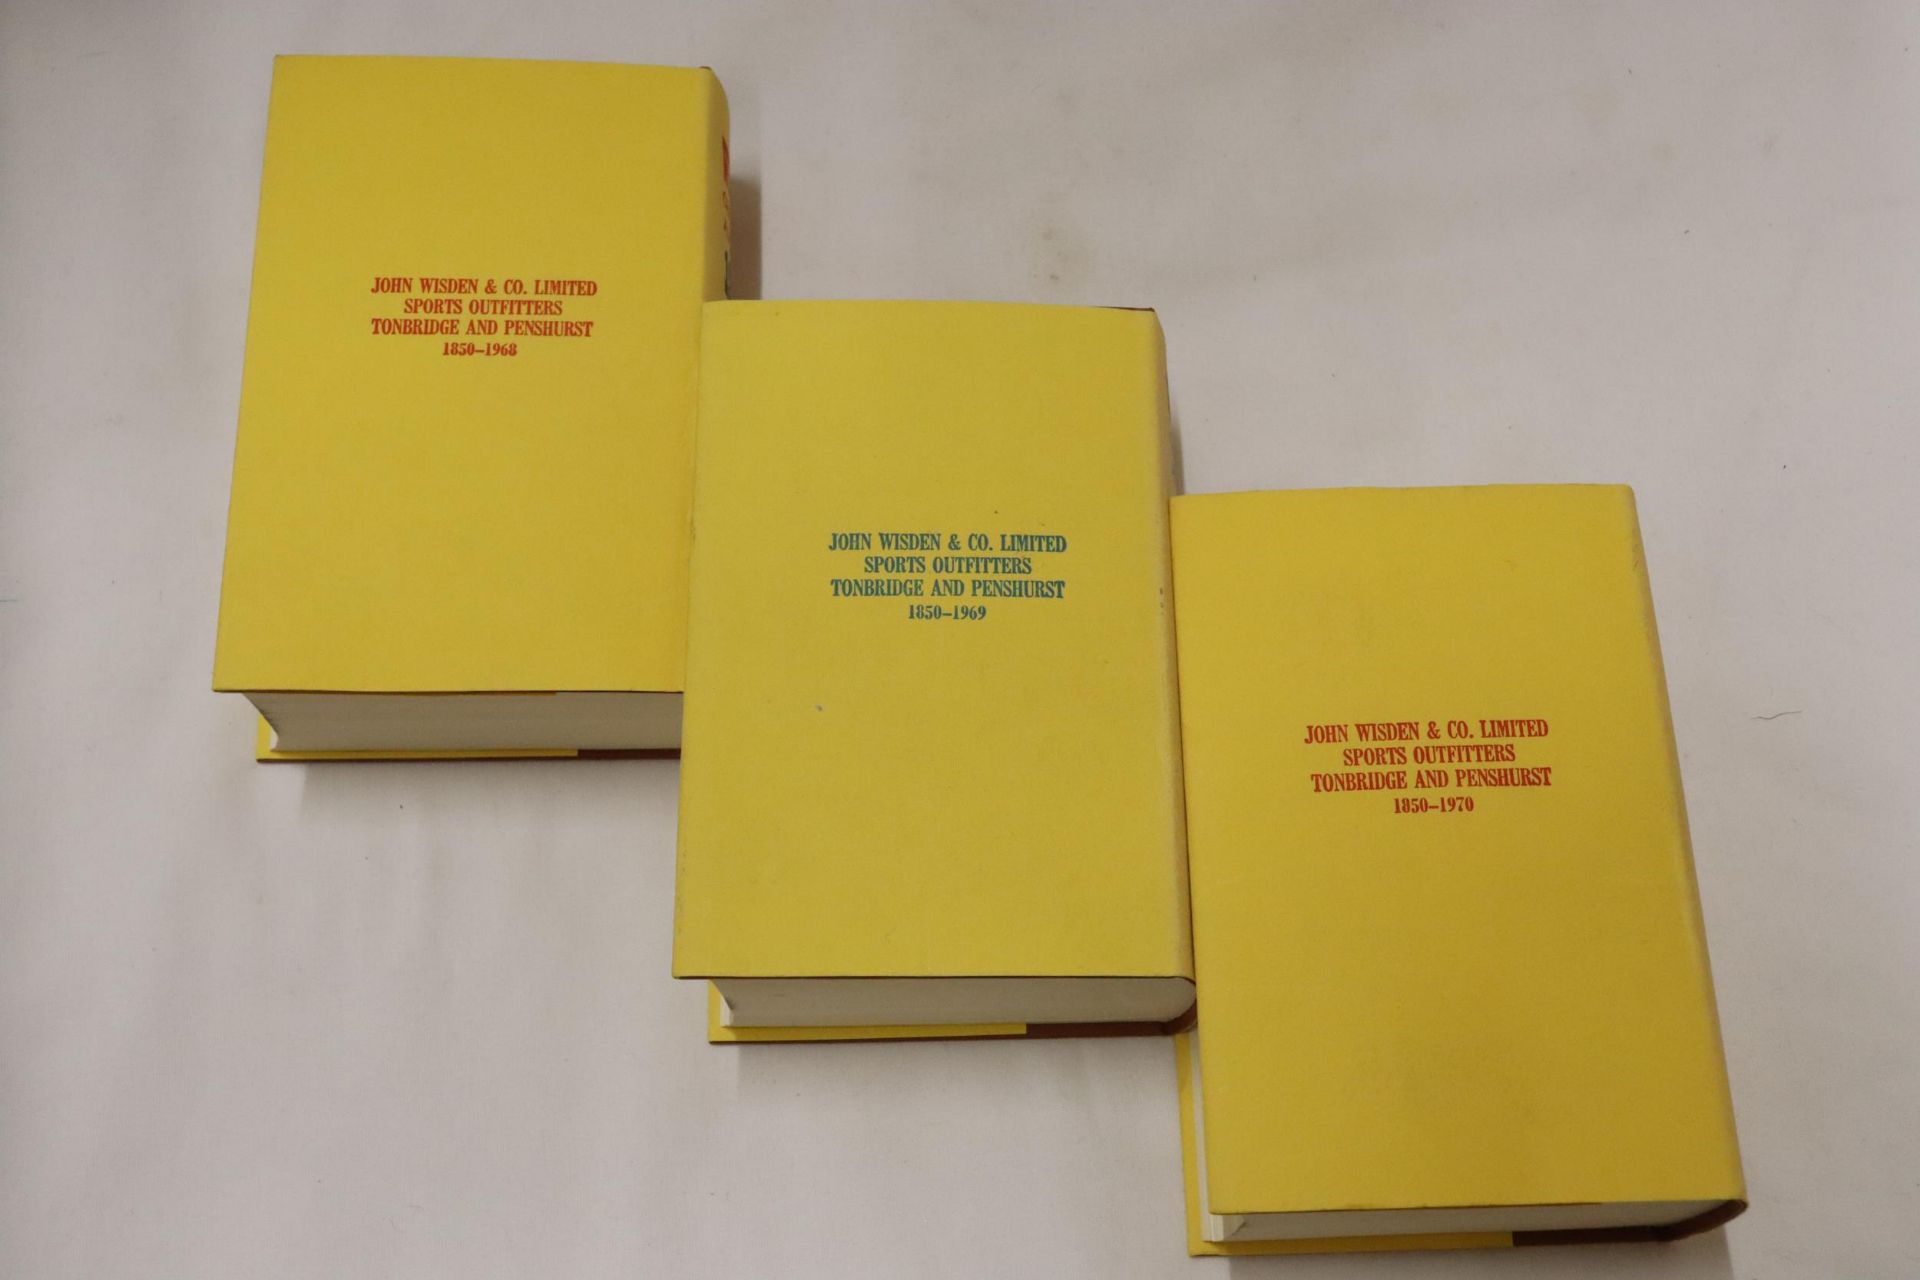 THREE HARDBACK COPIES OF WISDEN'S CRICKETER'S ALMANACKS, 1968, 1969 AND 1970. THESE COPIES ARE IN - Image 3 of 3